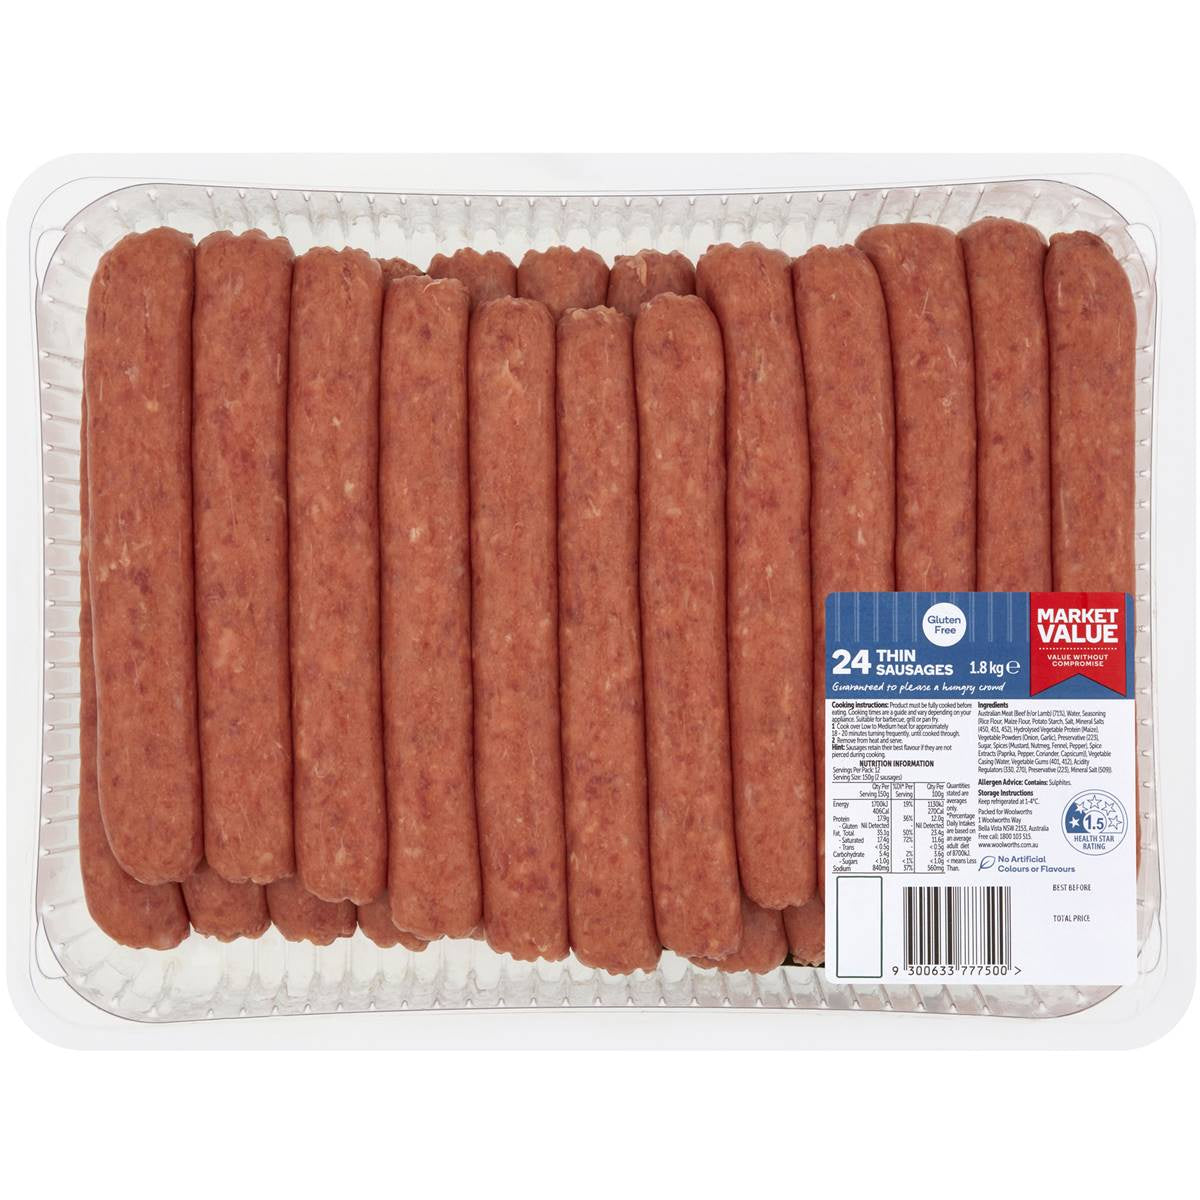 Woolworths Market Value Thin Sausage - 1.8Kg